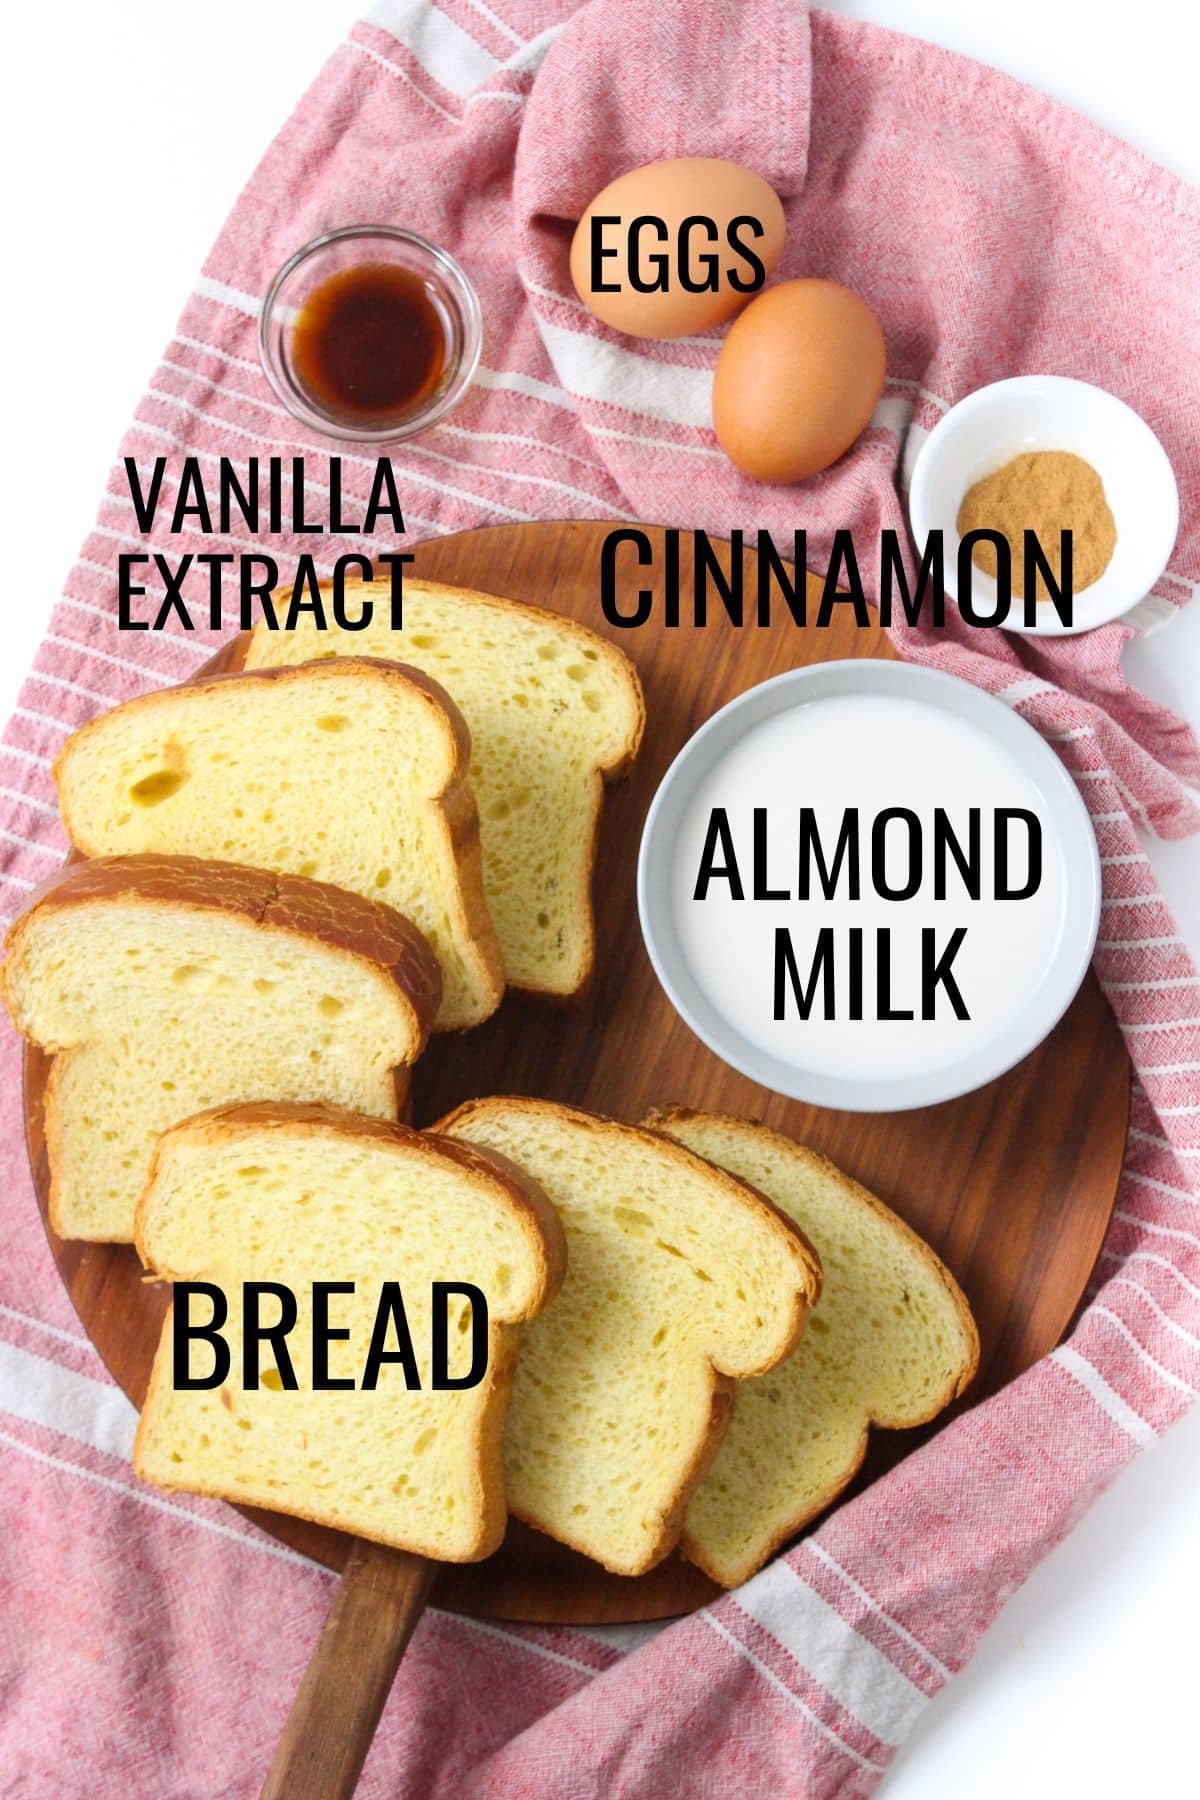 French toast ingredients with almond milk